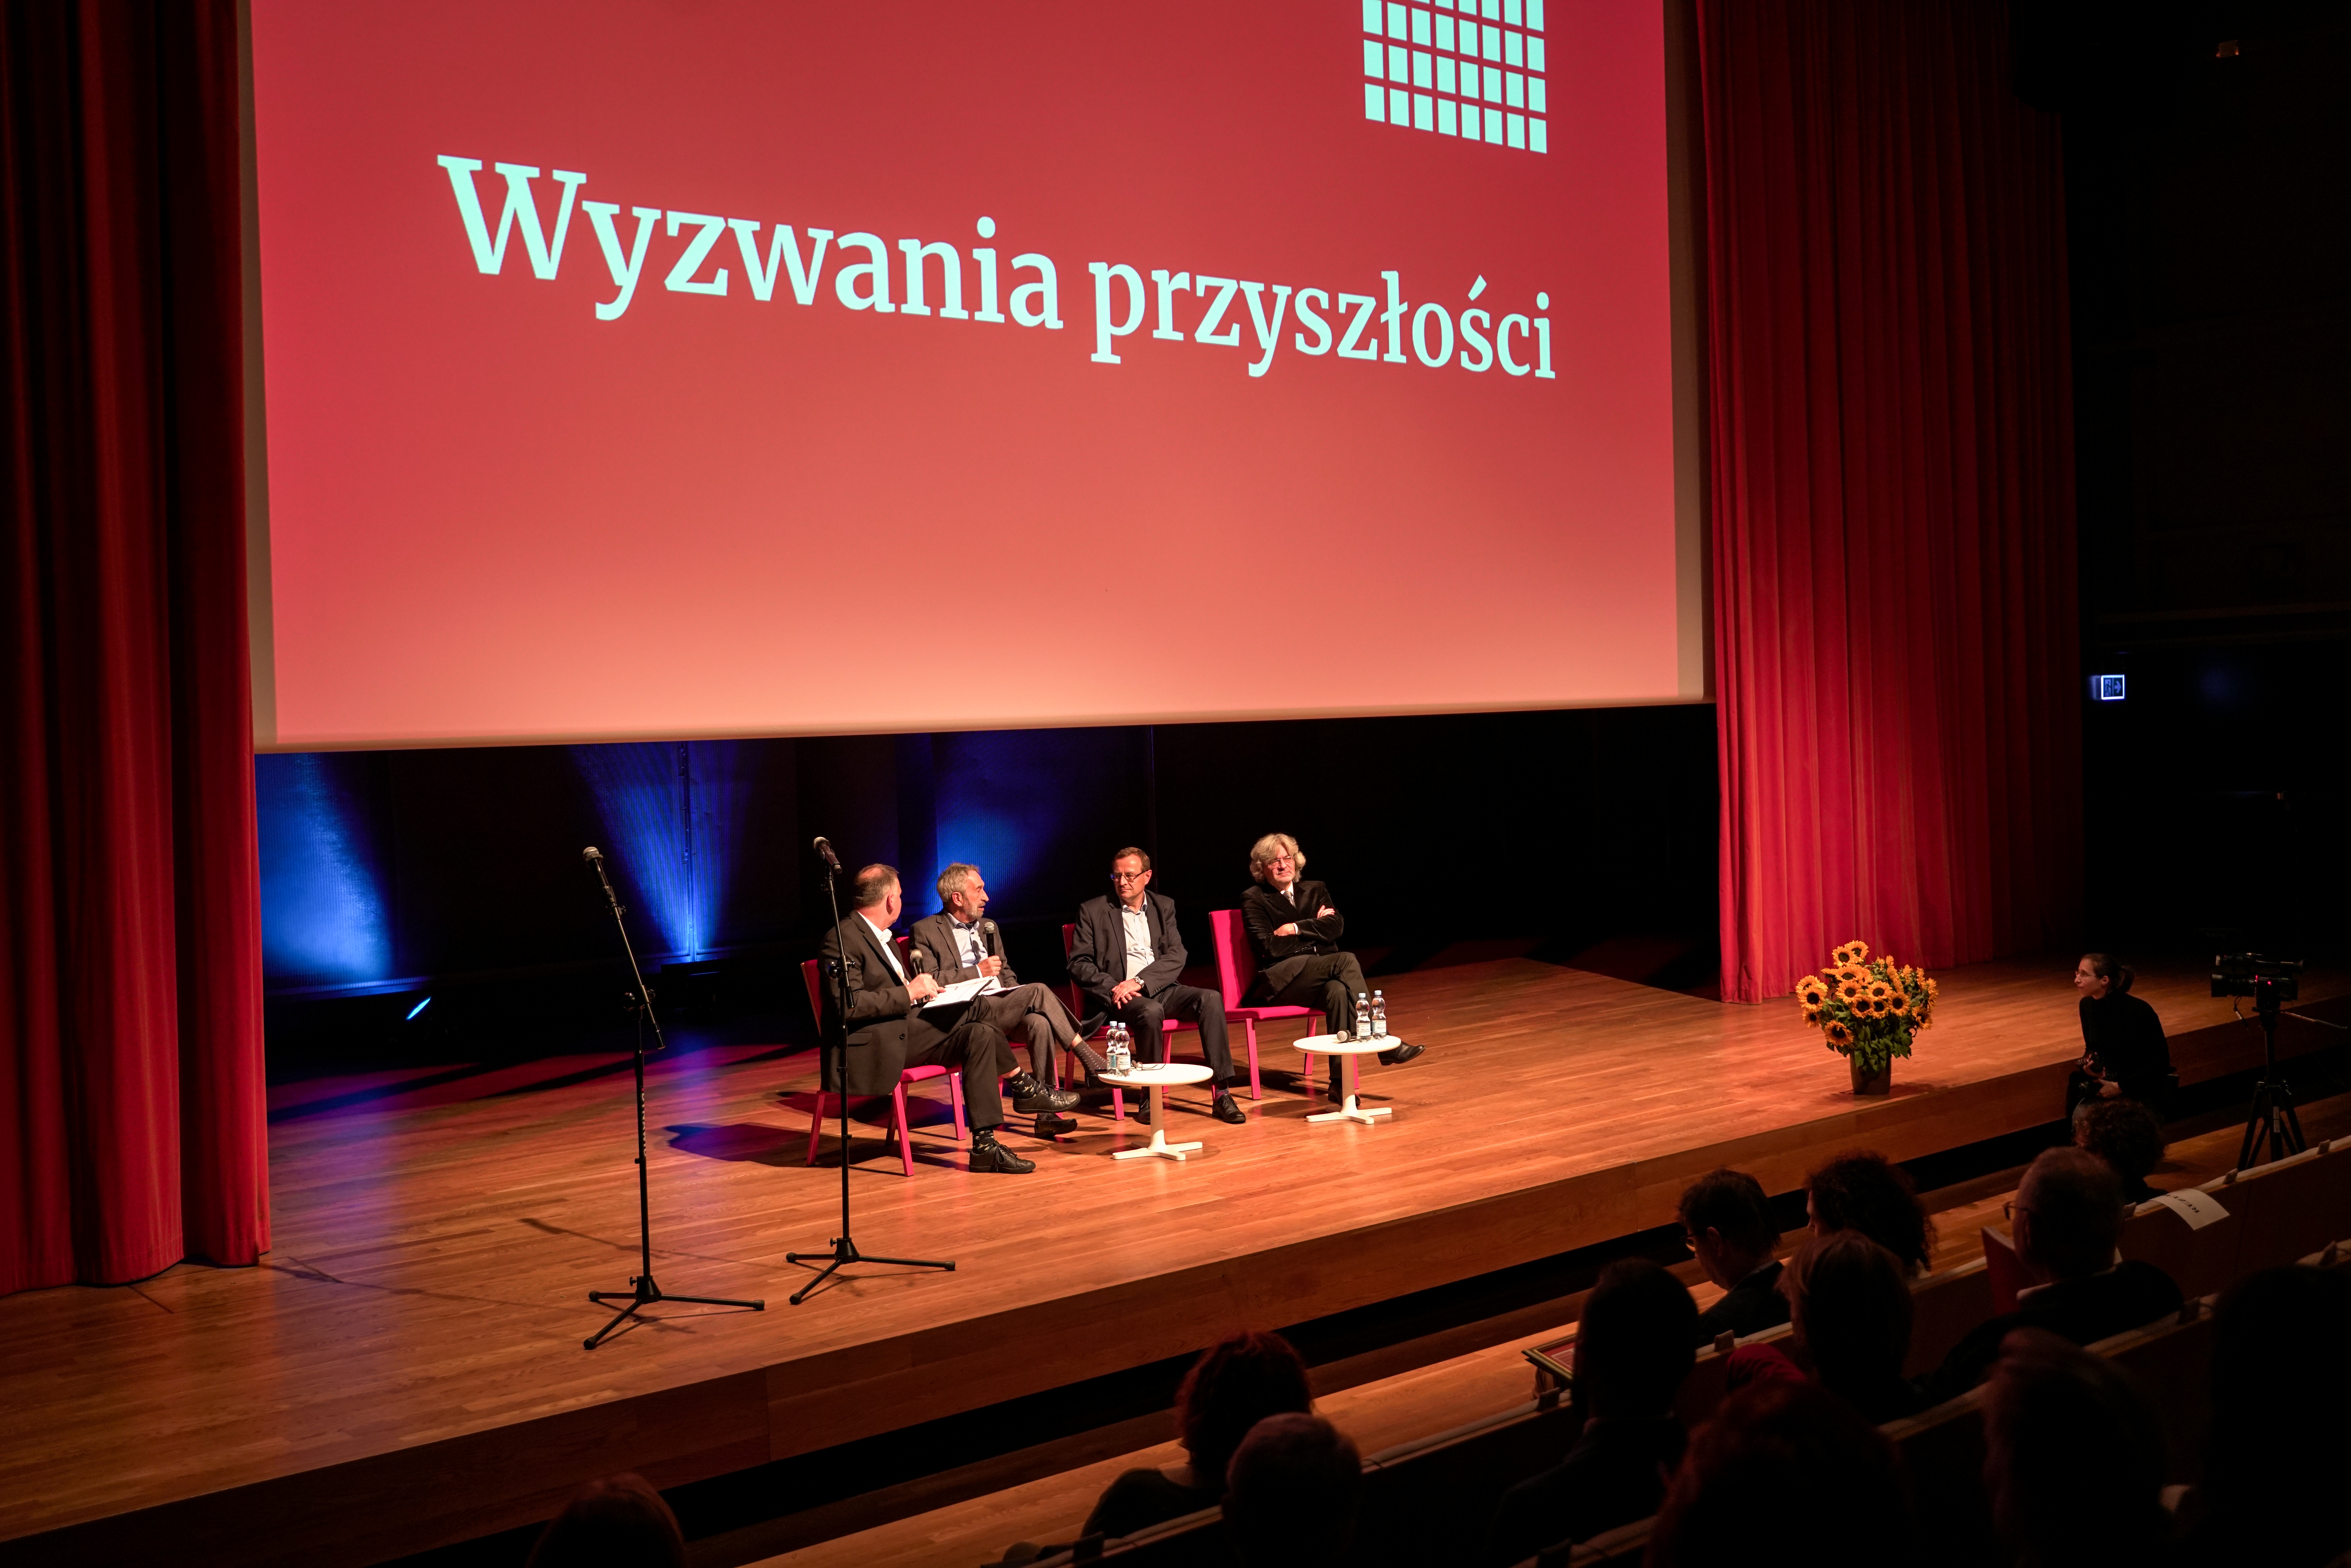 Historians come together to uncover disturbing aspects of Polish and Eastern European shared history.